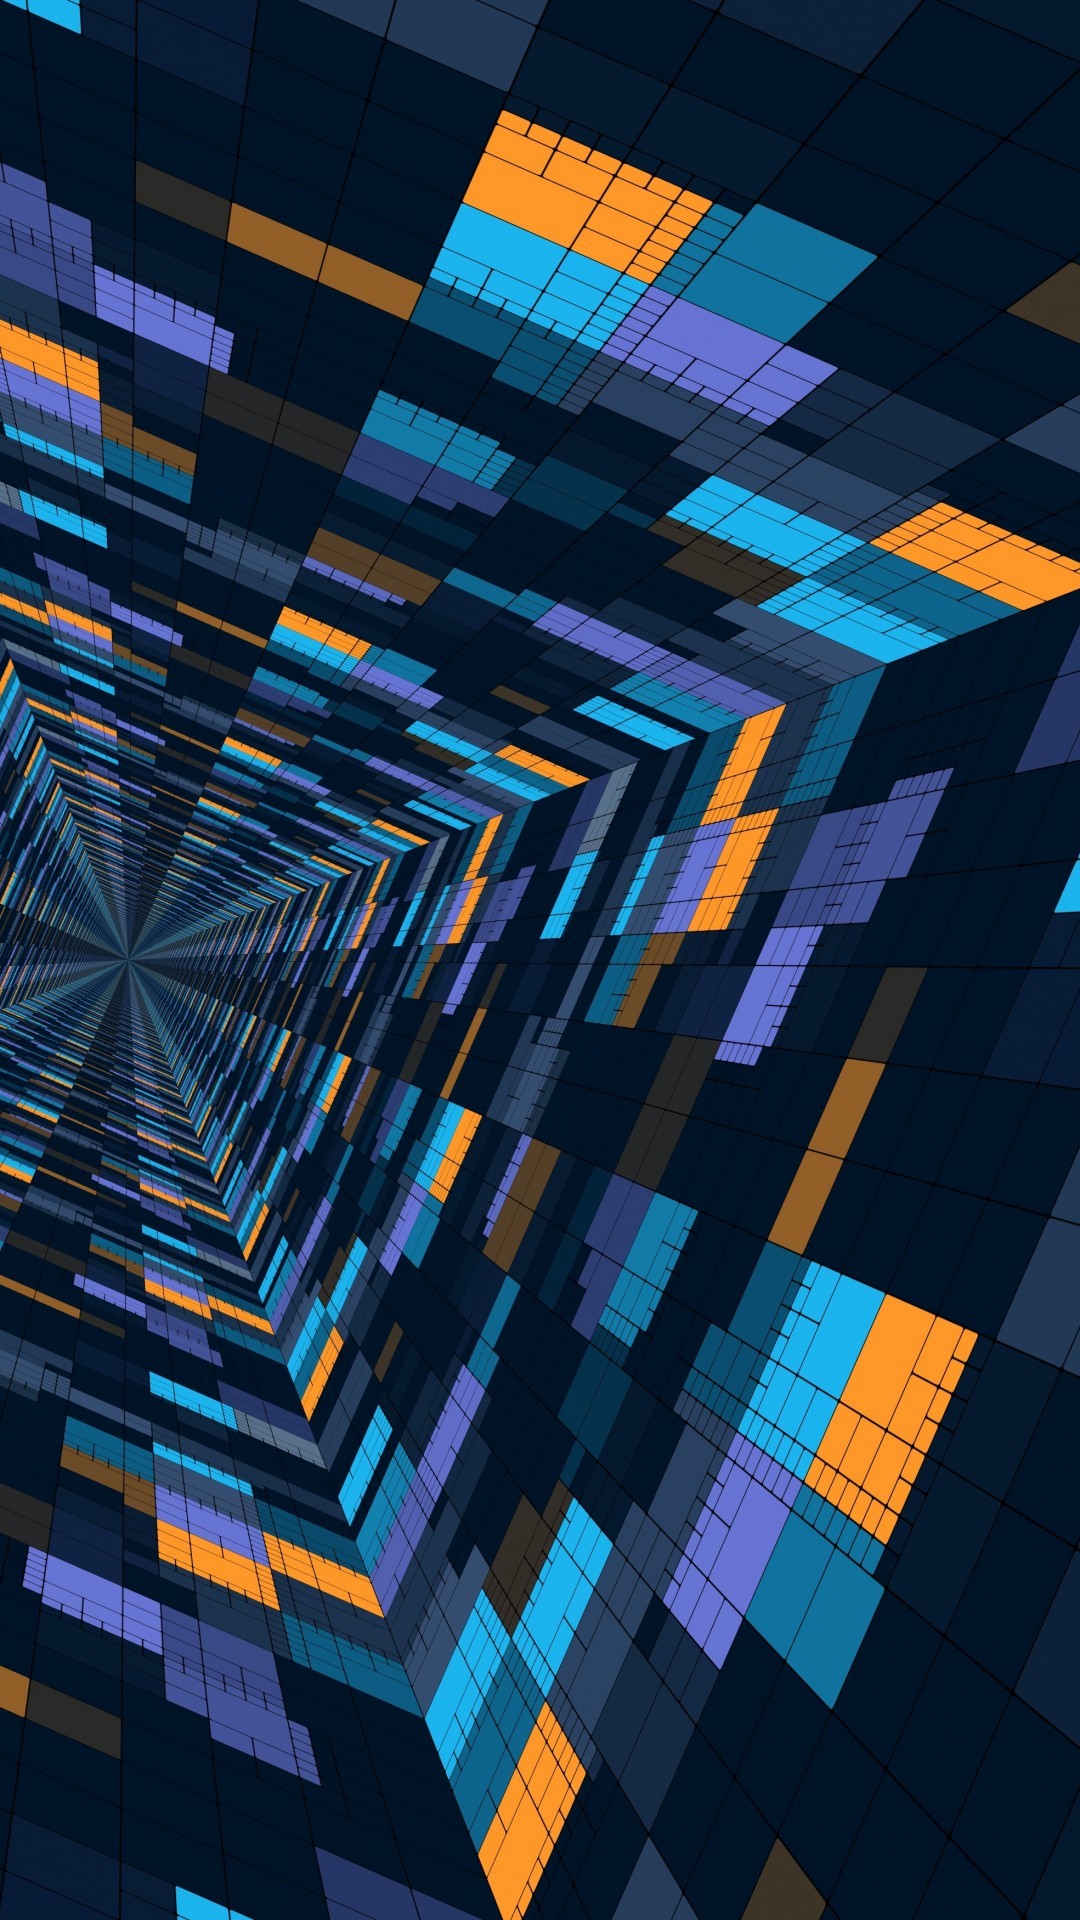 Infinite Hole, Geometric, Squares, Perspective - HD Wallpaper 